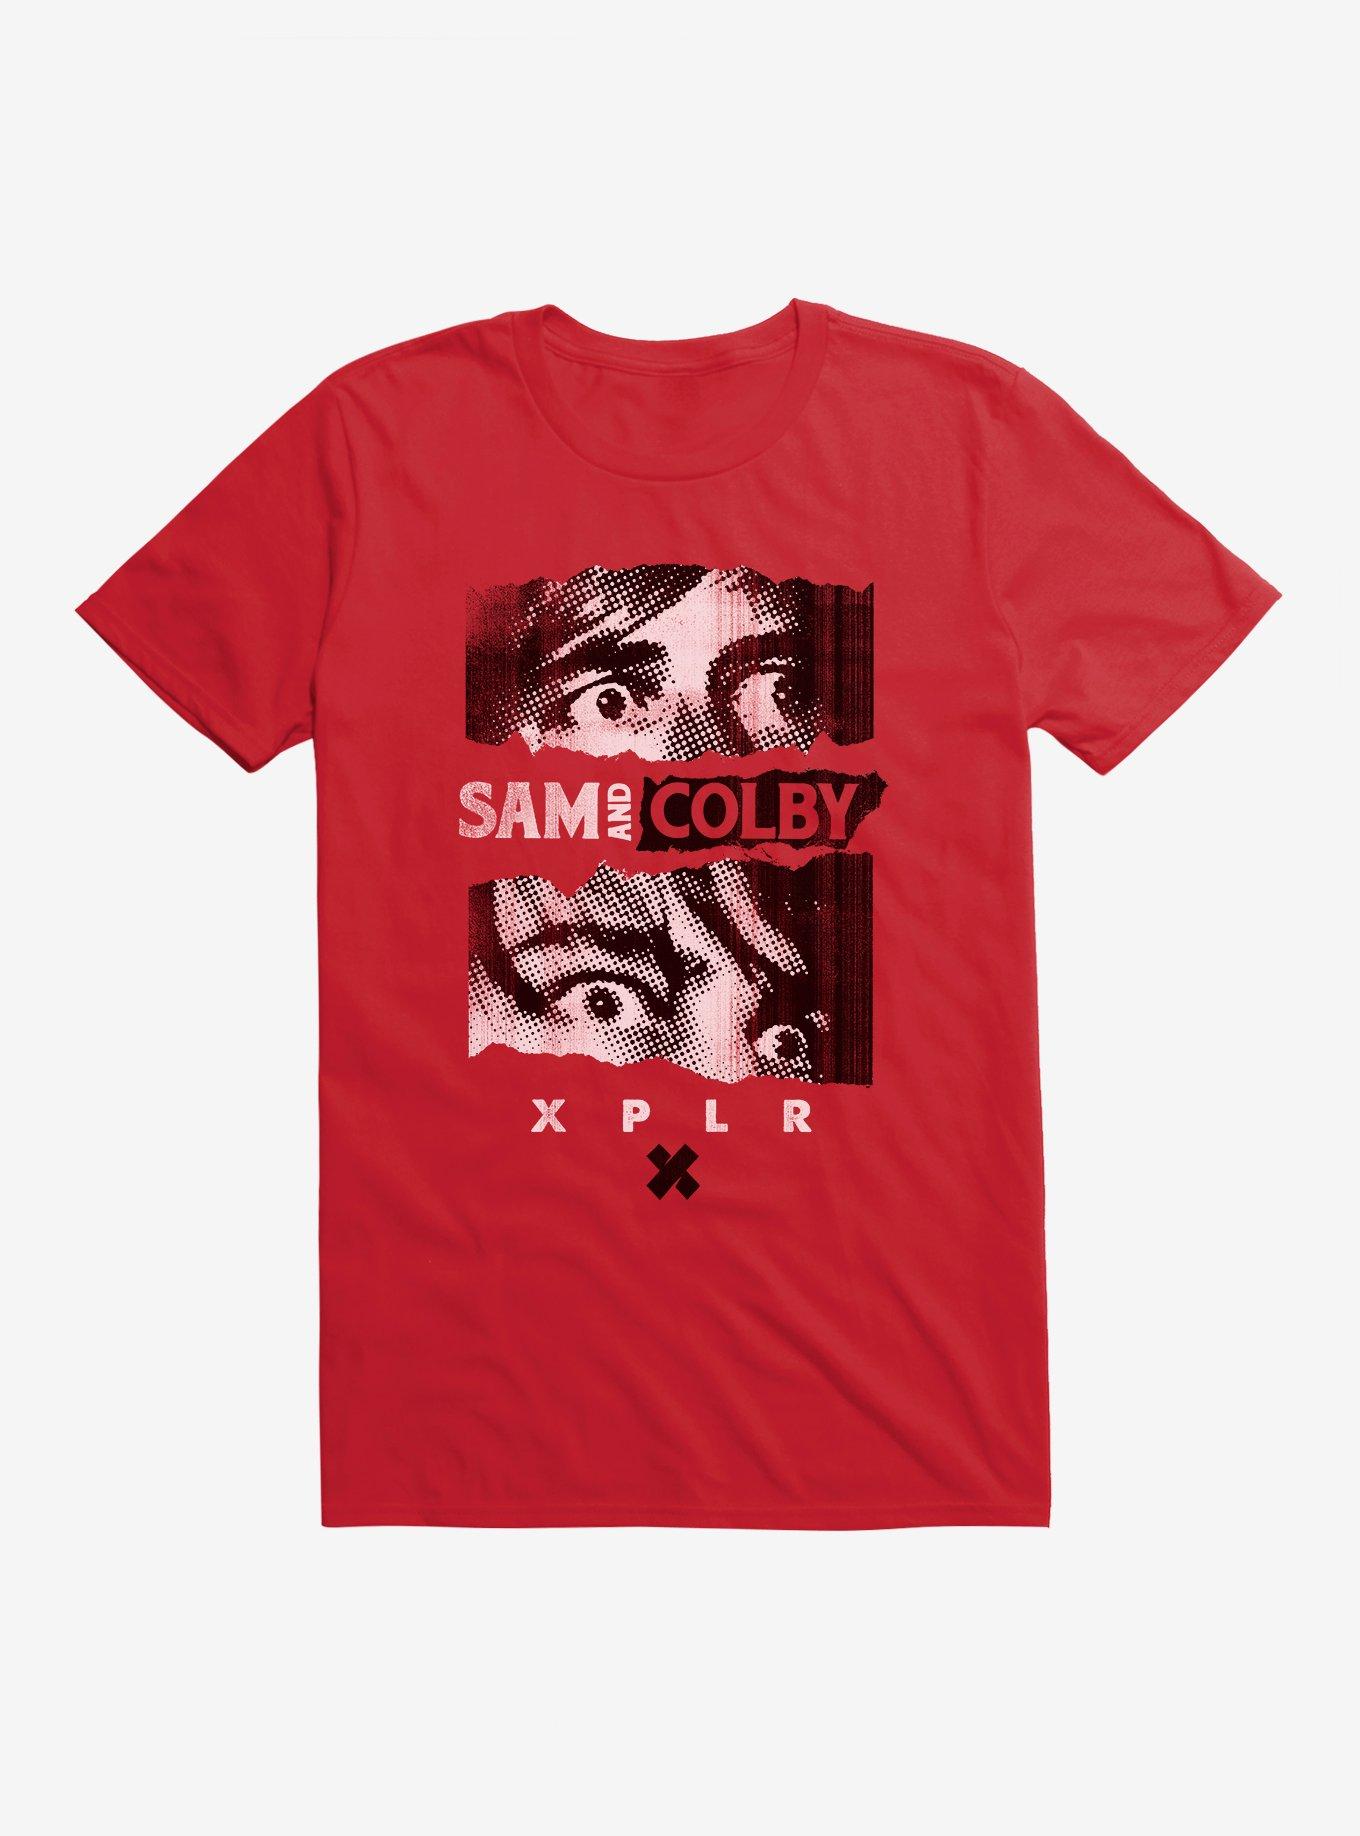 Explore Exclusive Sam and Colby Merchandise Online